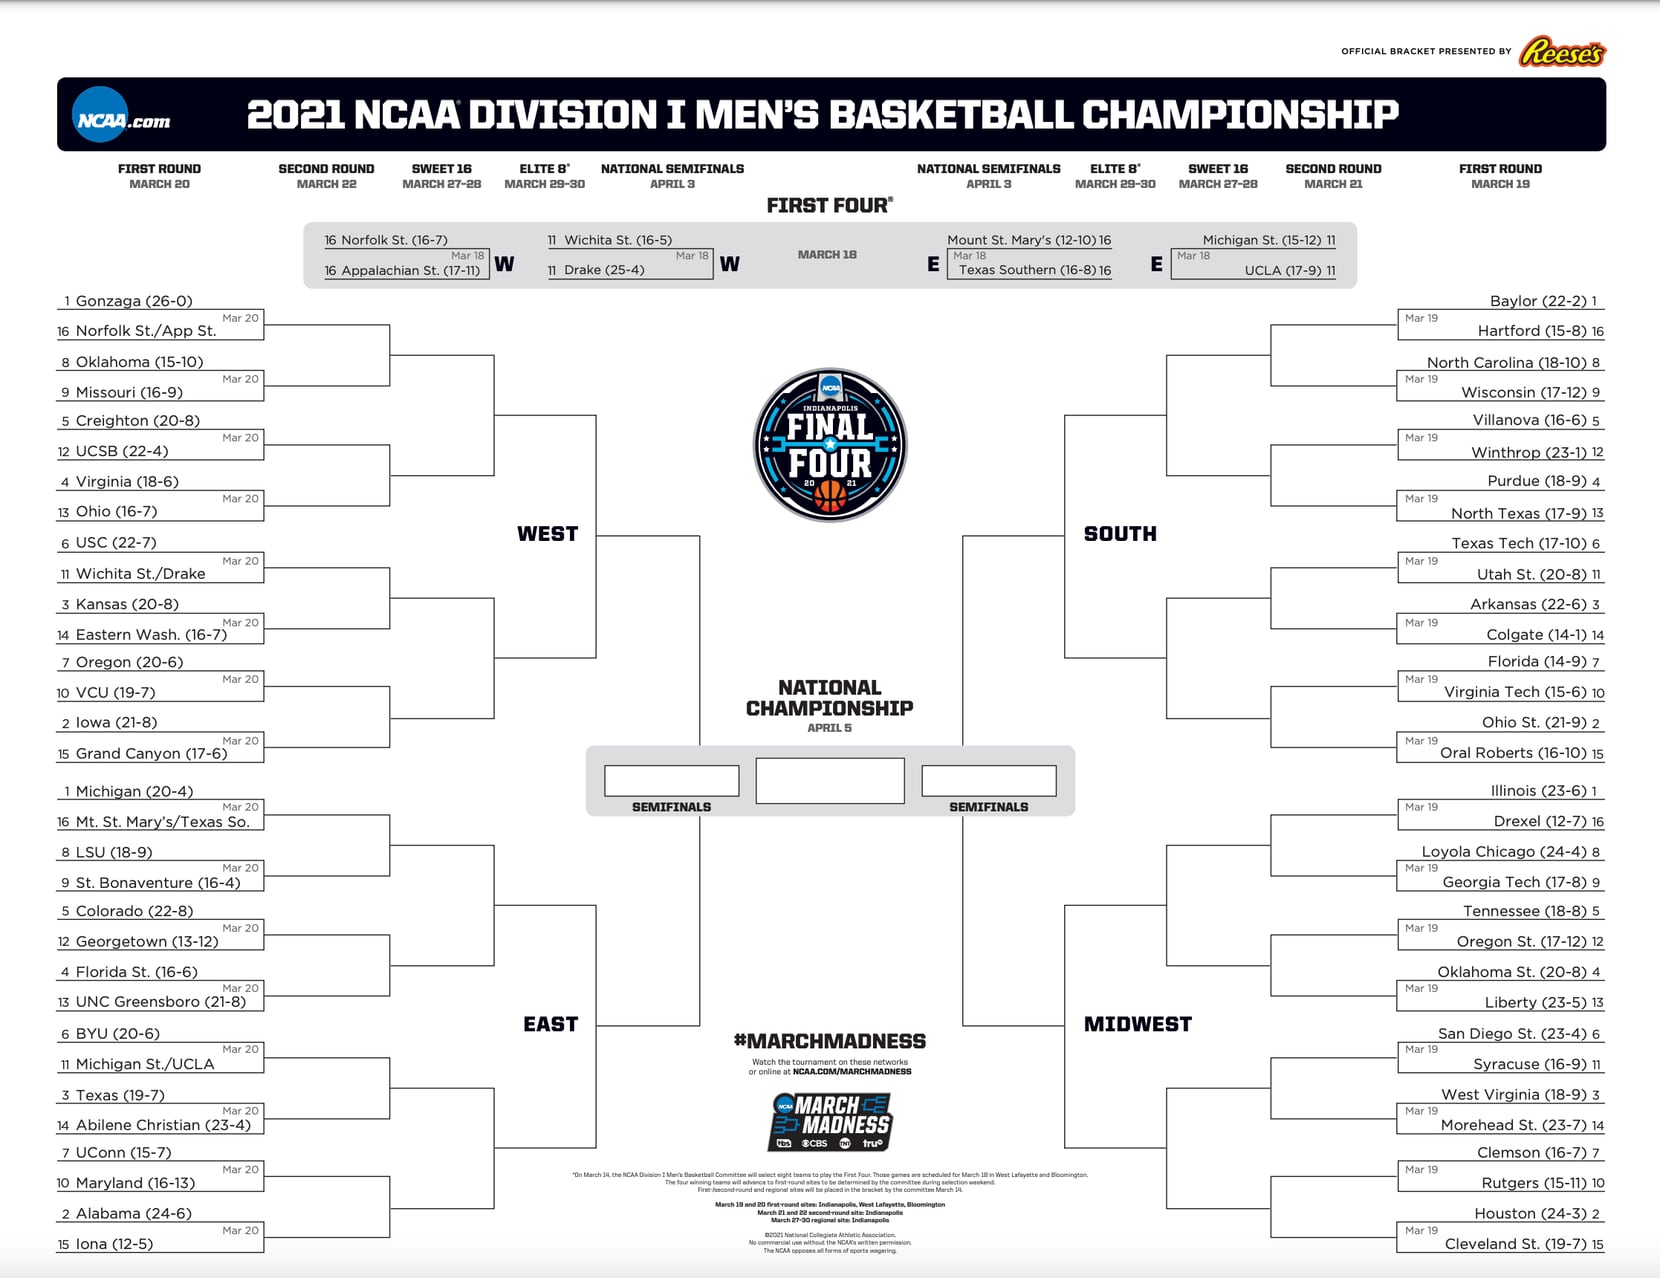 Ready for March Madness? Print and fill out your own NCAA Tournament